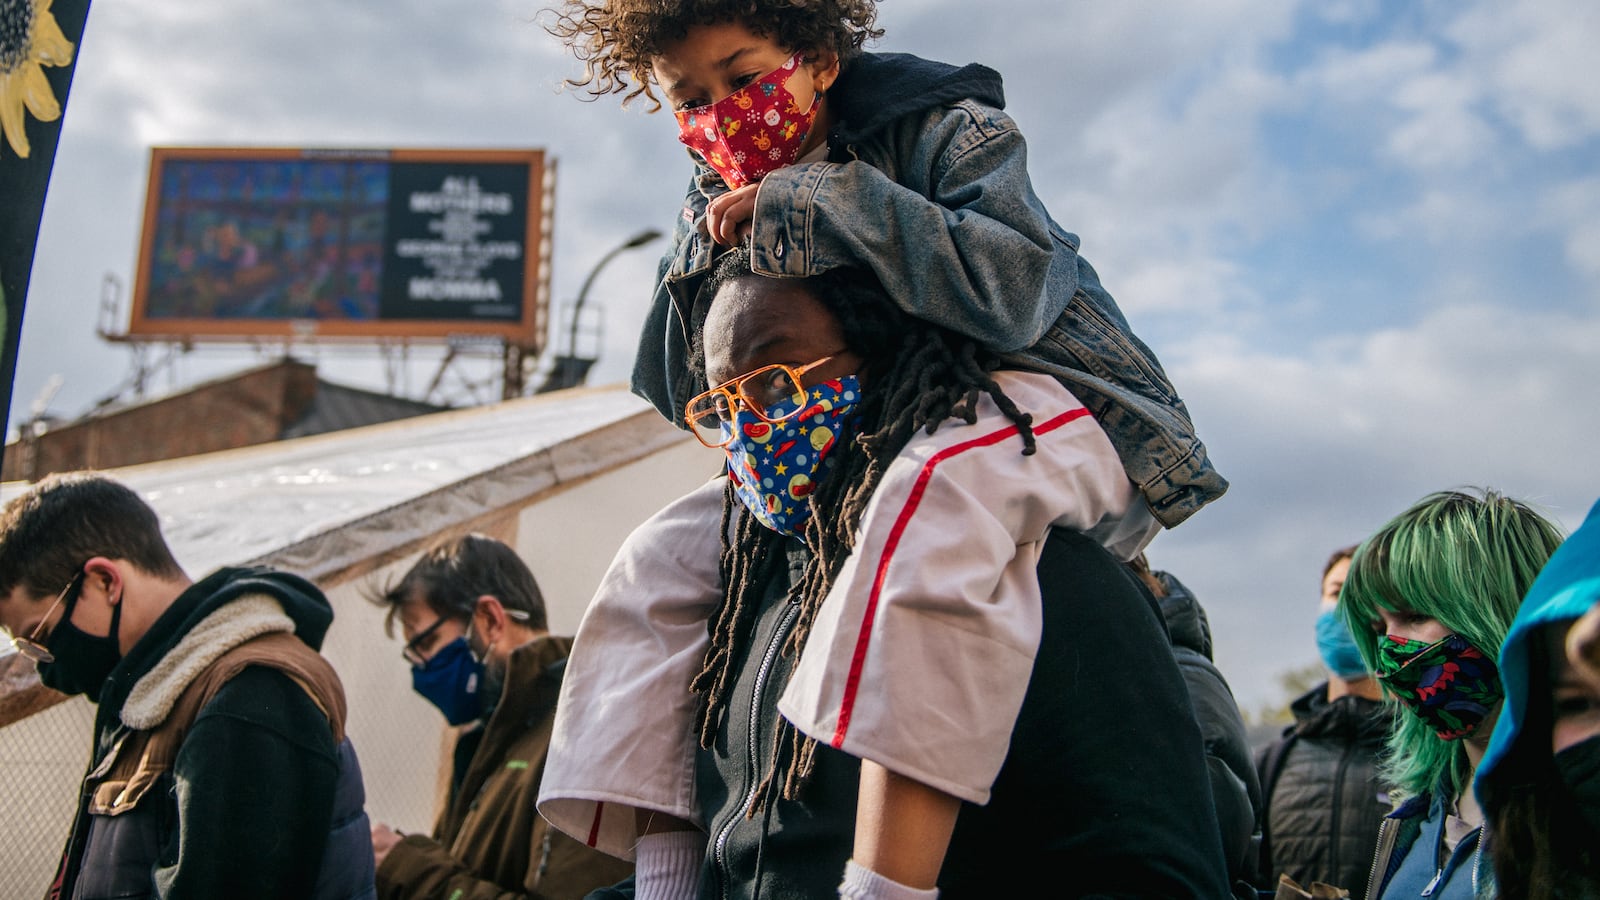 A child wearing a red mask, jean jacket and white pants with a red stripe is carried on their father’s shoulders, who wears orange-rimmed glasses and a blue mask with designs. Many people around them are bowing their heads.